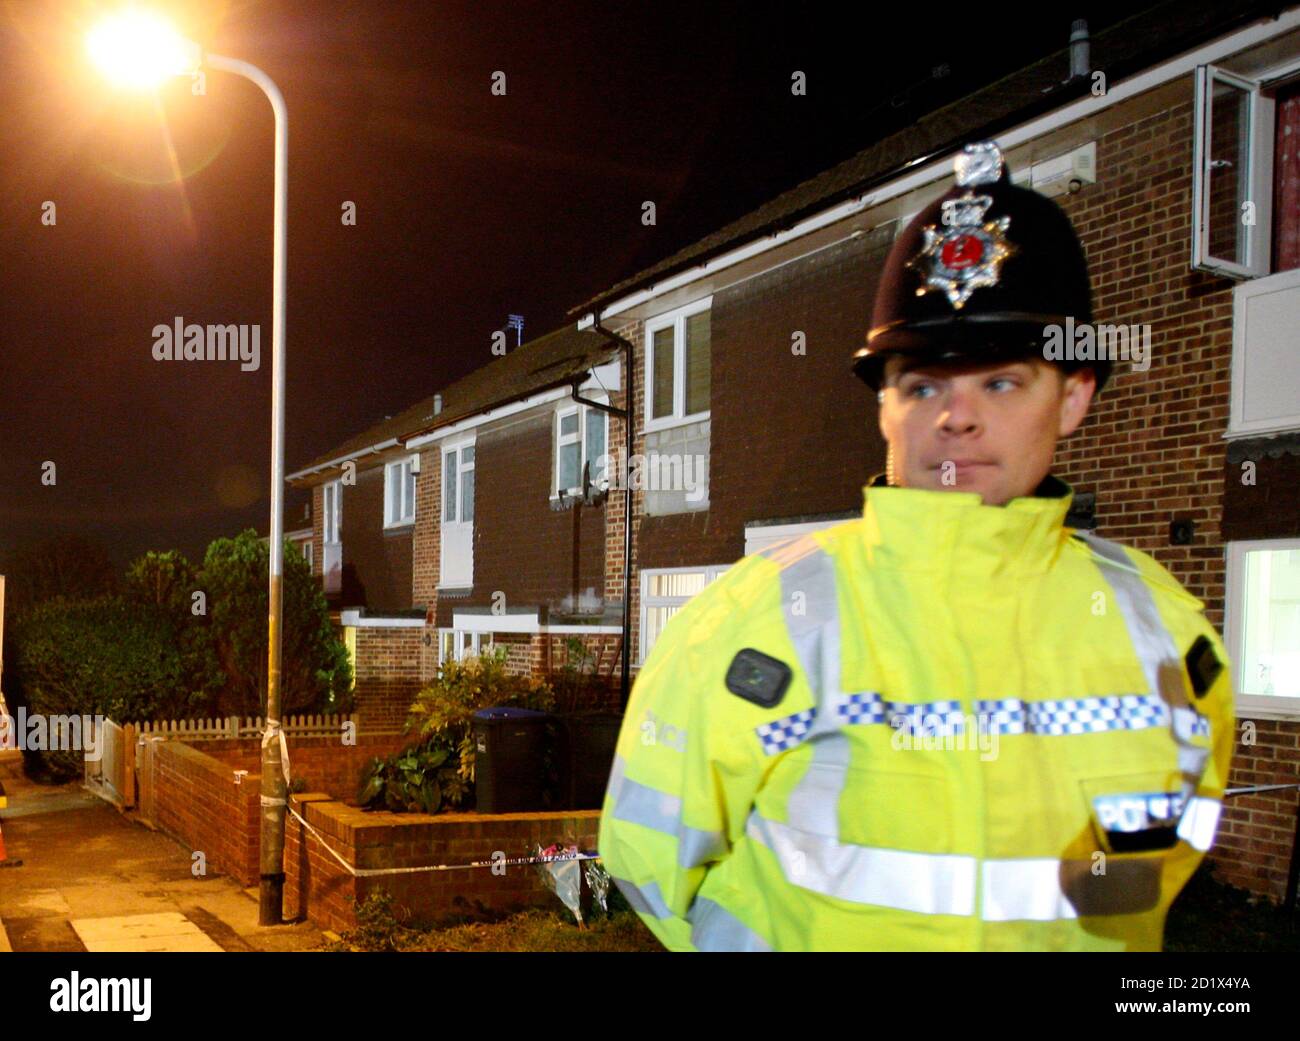 A police officer stands guard at a cordon outside a house in central Margate, southeast England, November 16, 2007.  A second body was found at the property today where extensive searches are under way as part of a nationwide investigation into unsolved cases of missing girls. Officers have been looking for remains of teenager Dinah McNicol, and have already found remains of missing 15-year-old Vicky Hamilton at the same Kent address.      REUTERS/Toby Melville      (BRITAIN) Stock Photo